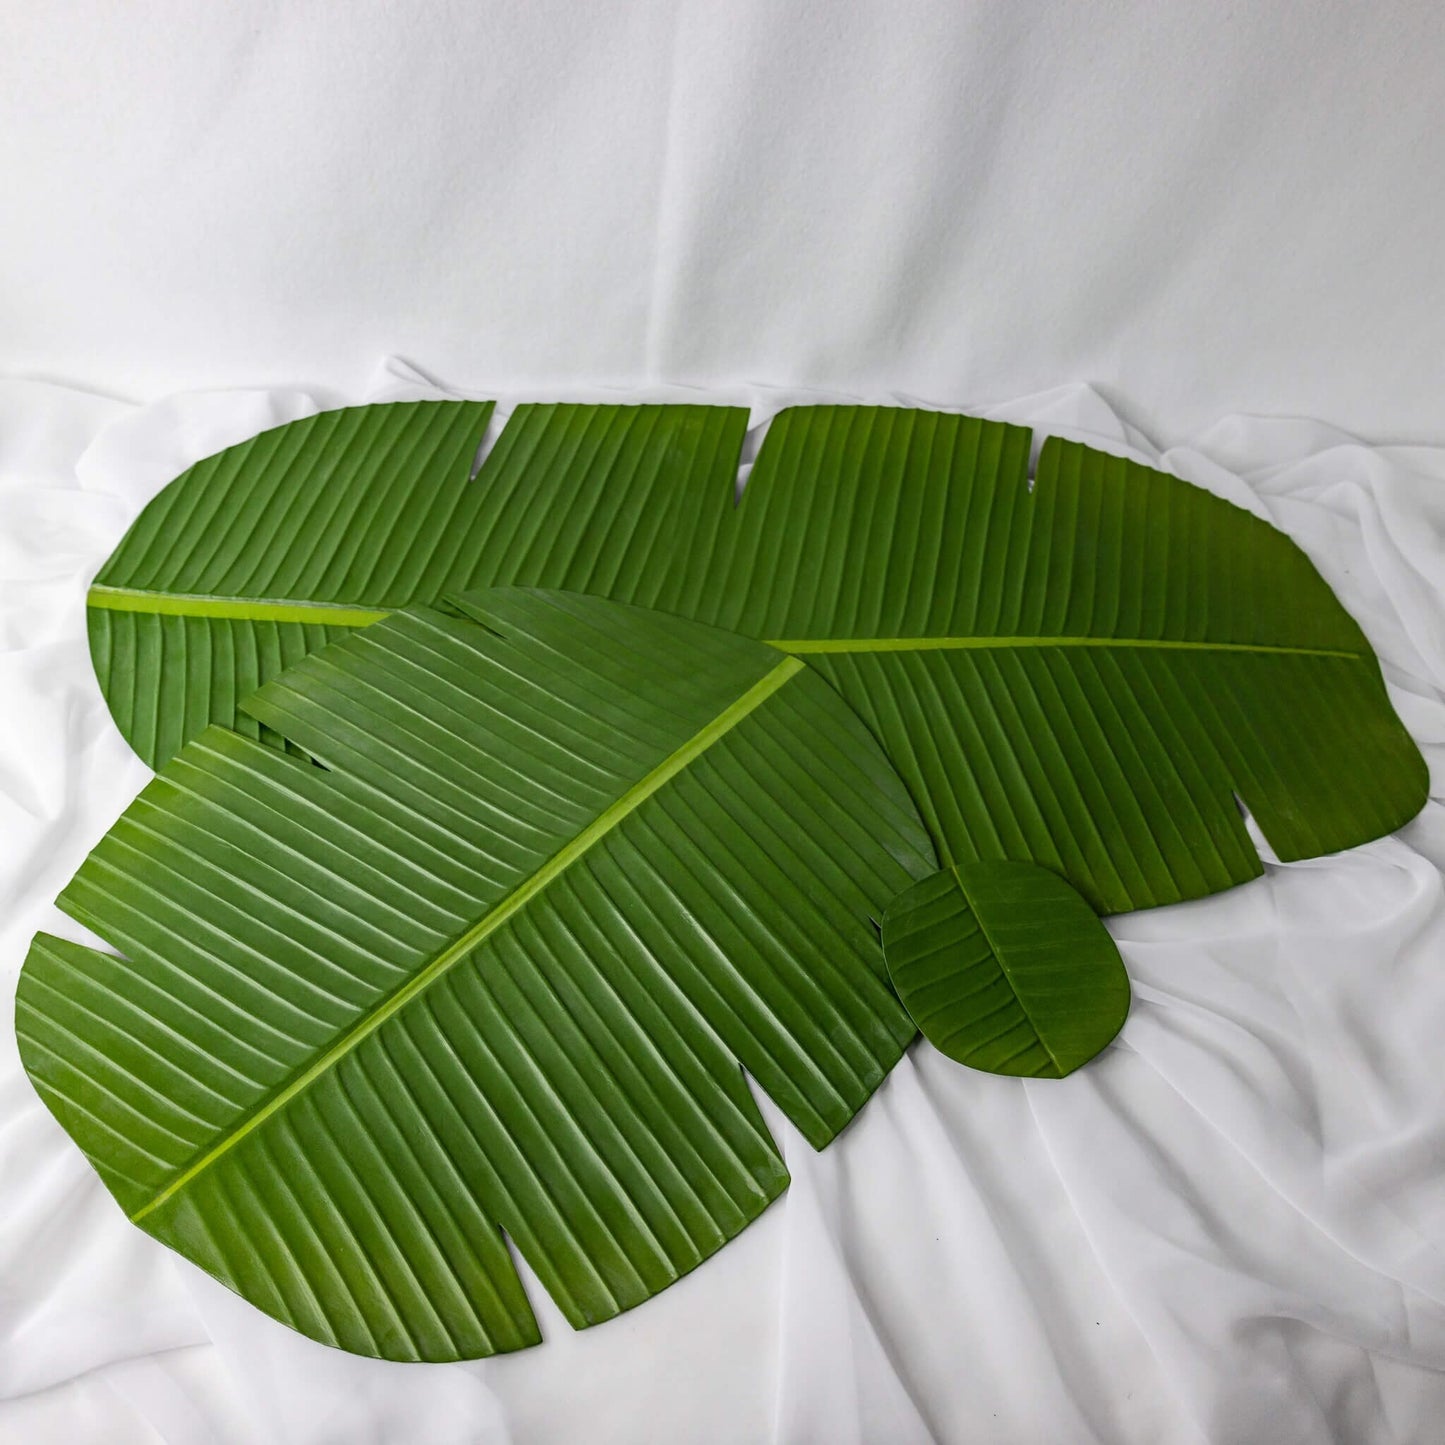 artificial banana leaf coaster, placemat, table runner